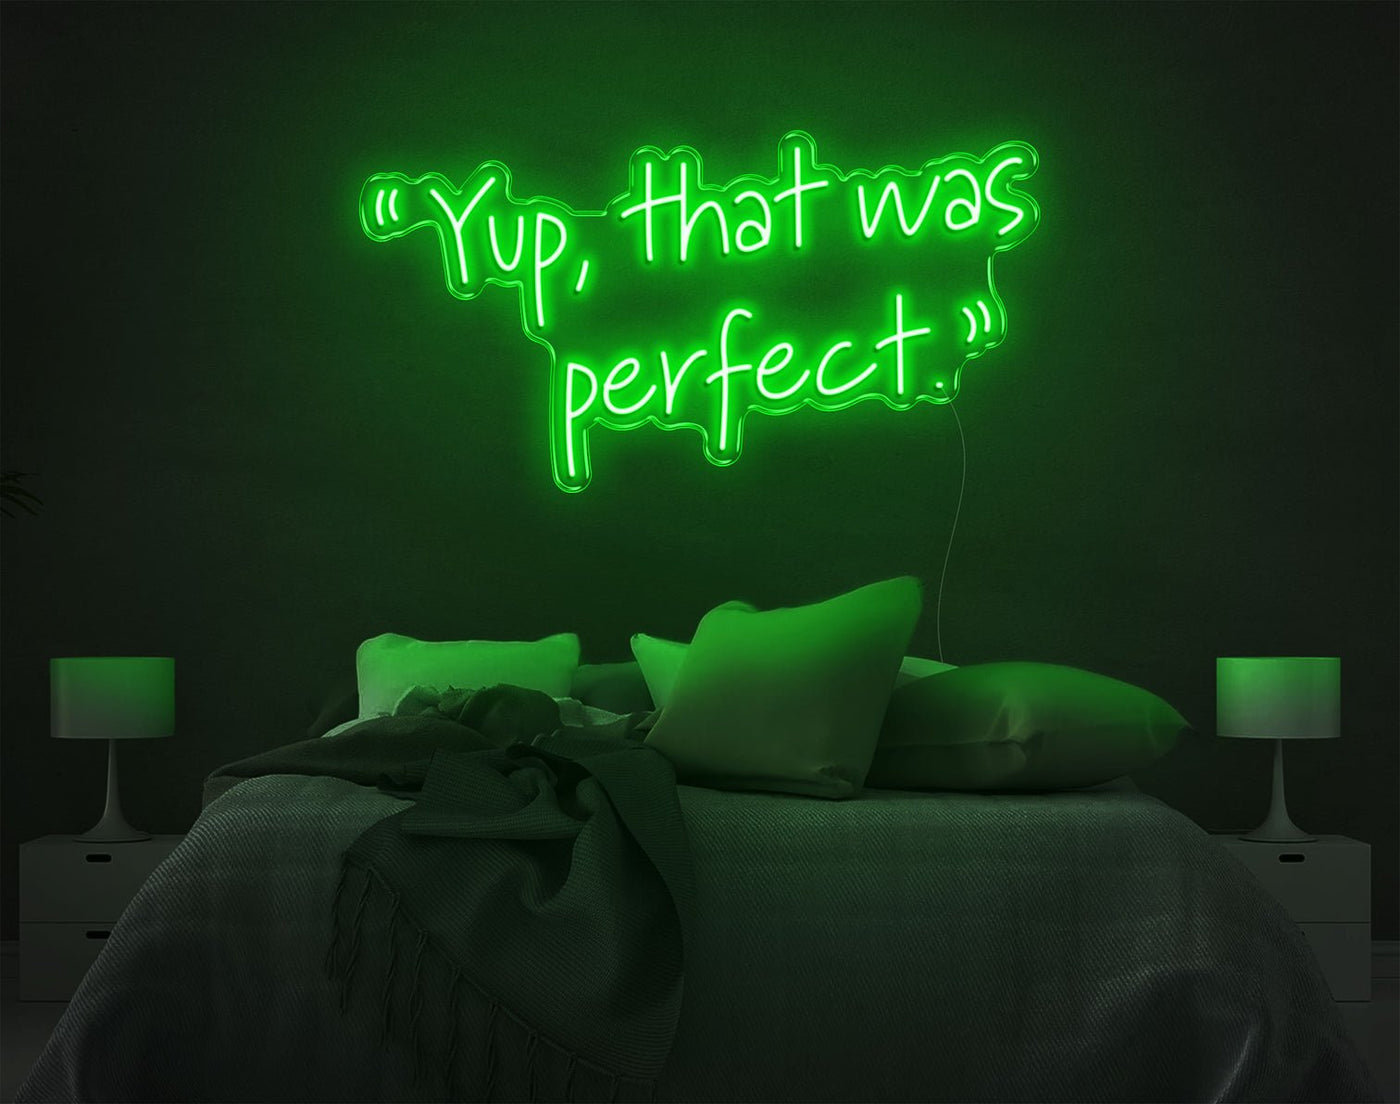 Yup, That Was Perfect LED Neon Sign - 19inch x 35inchHot Pink